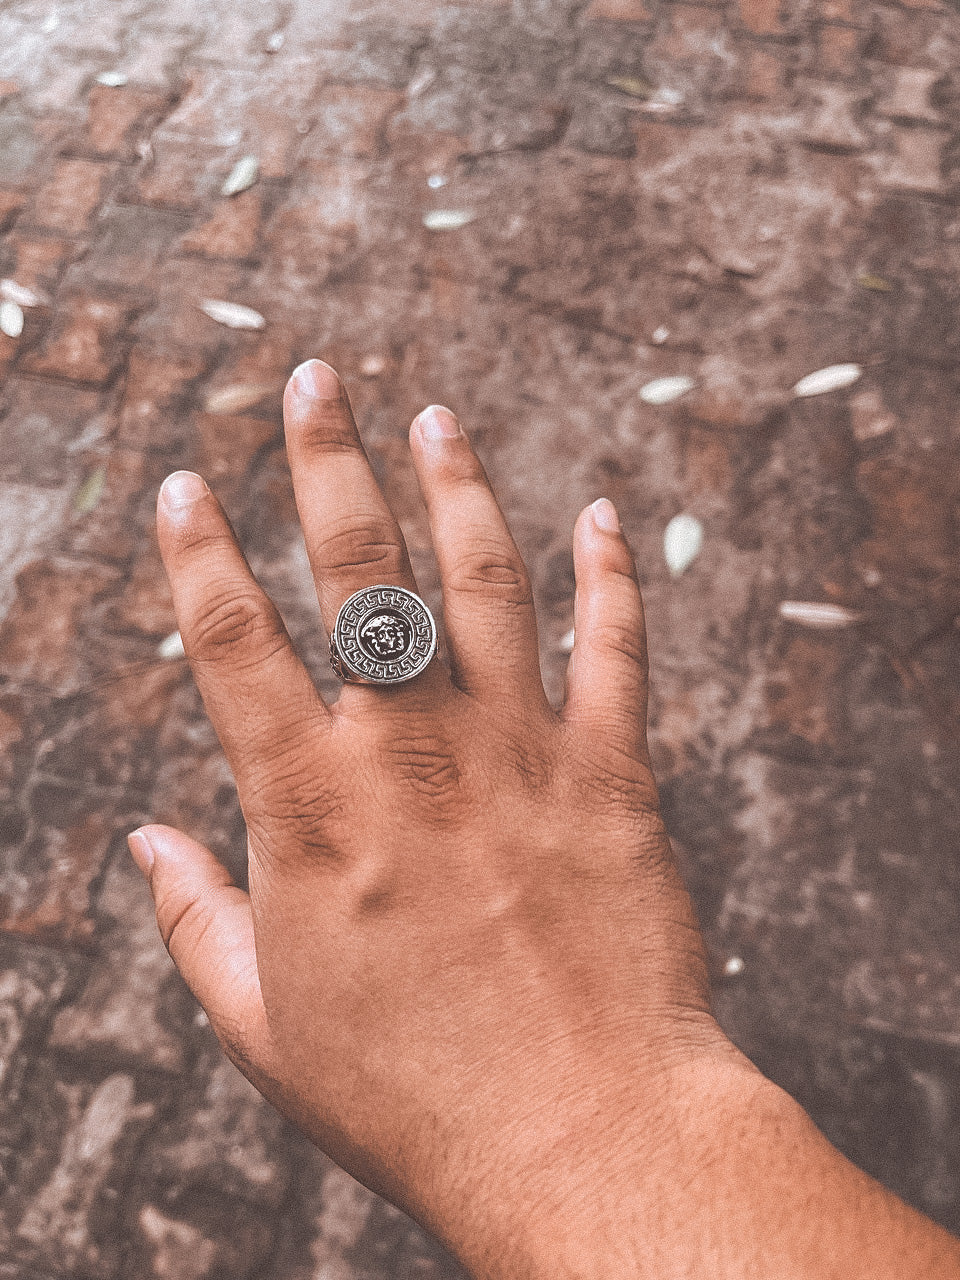 Egyptian Lion Coin Silver Oxidized Waterproof Ring